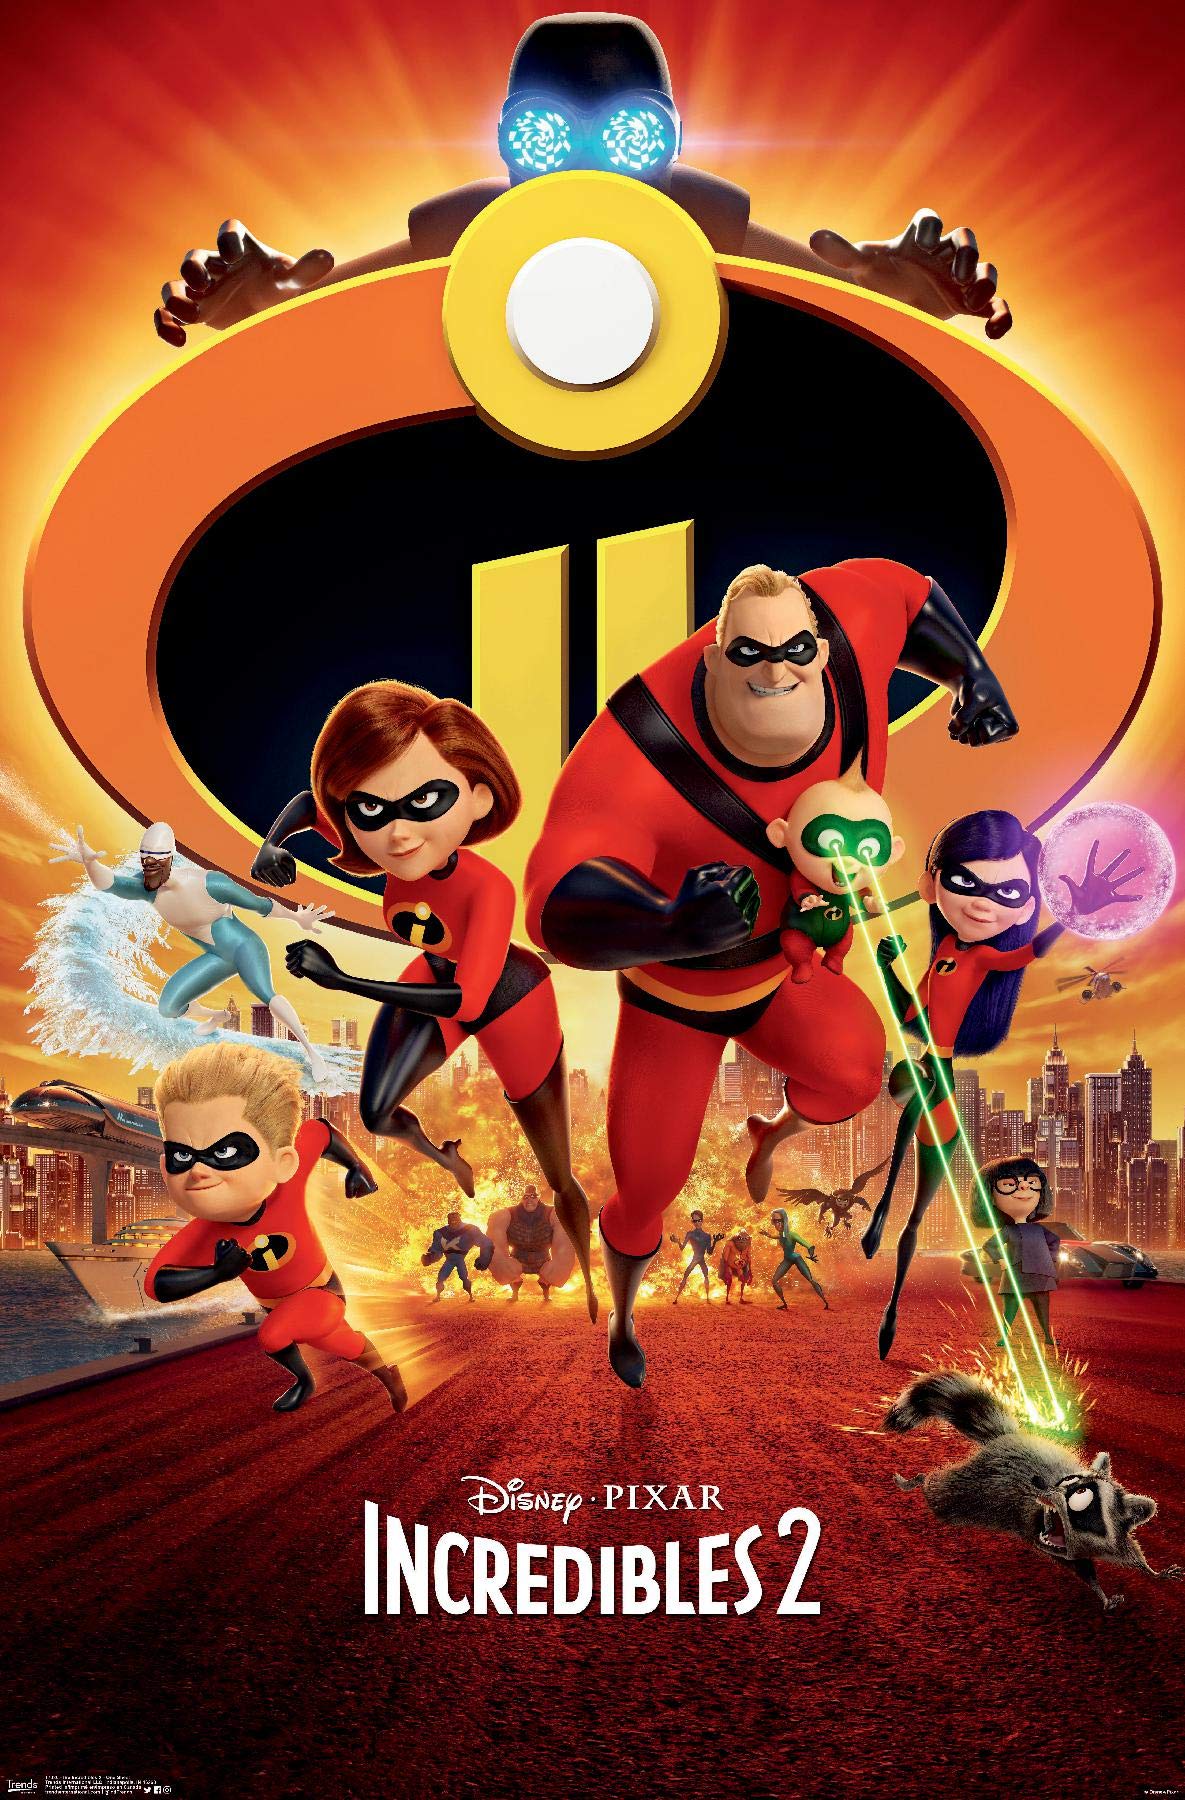 Poster for The Incredibles 2 from Disney Pixar